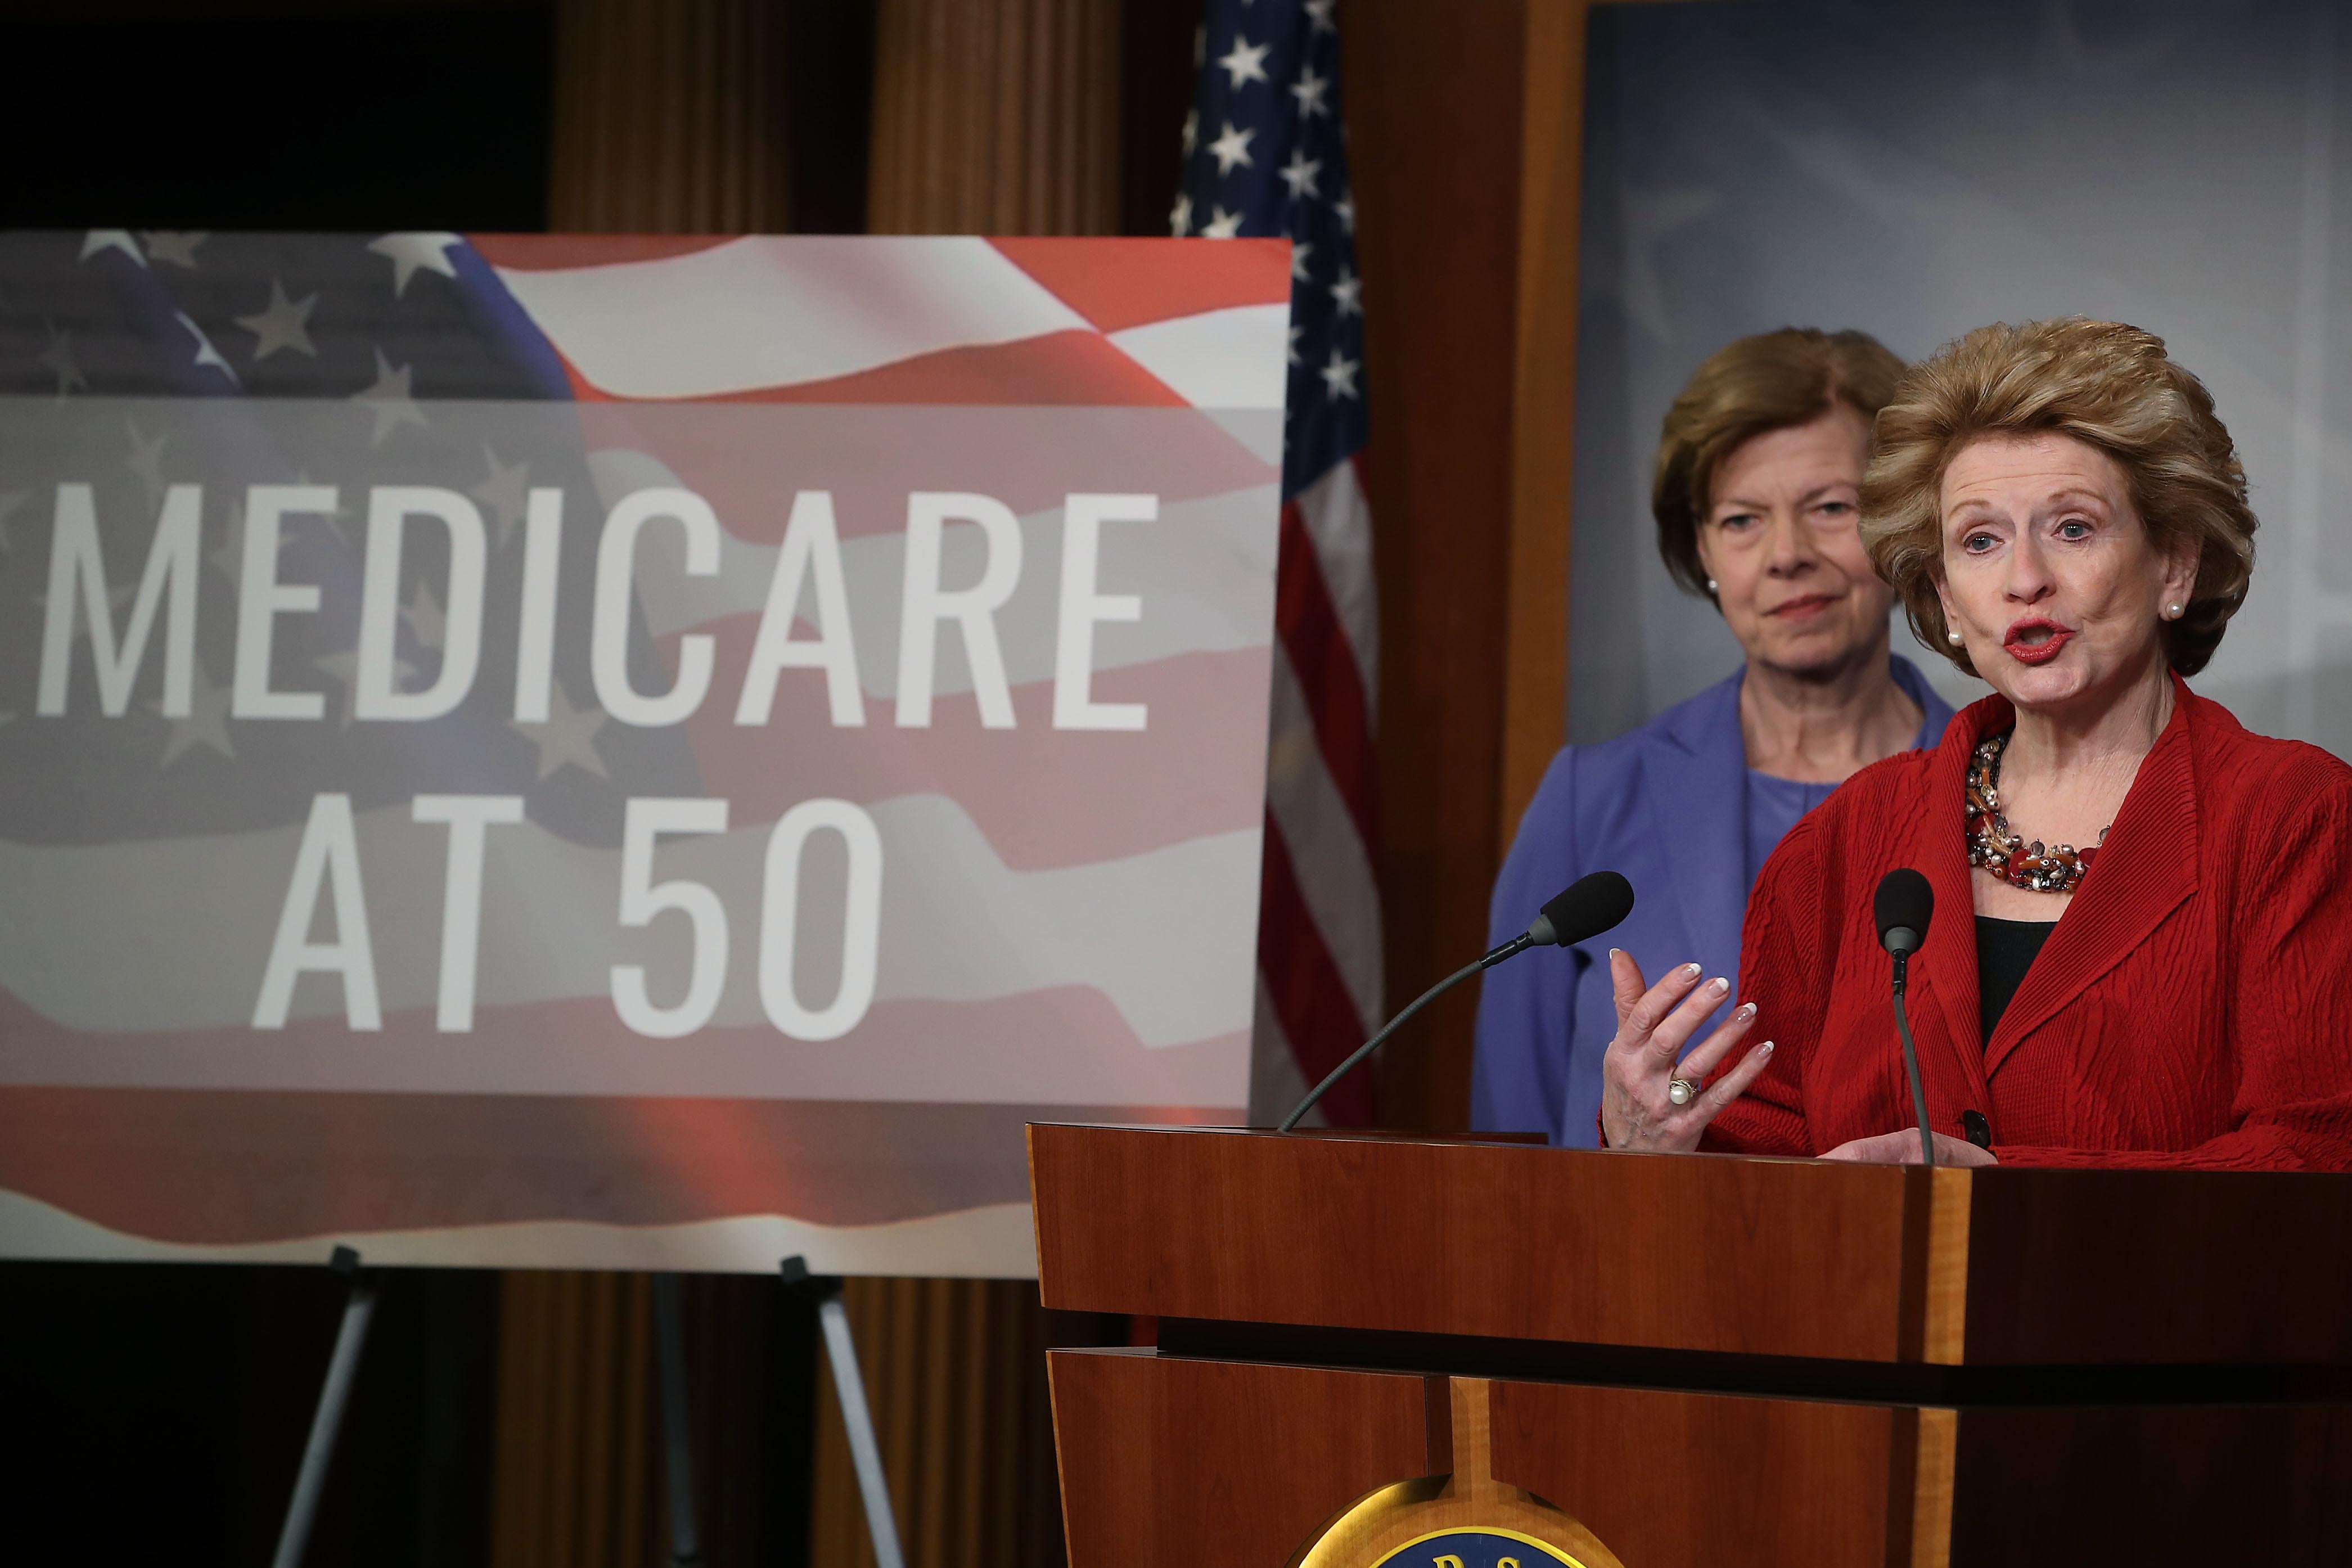 Tammy Baldwin and Debbie Stabenow onstage next to a poster reading "Medicare at 50."